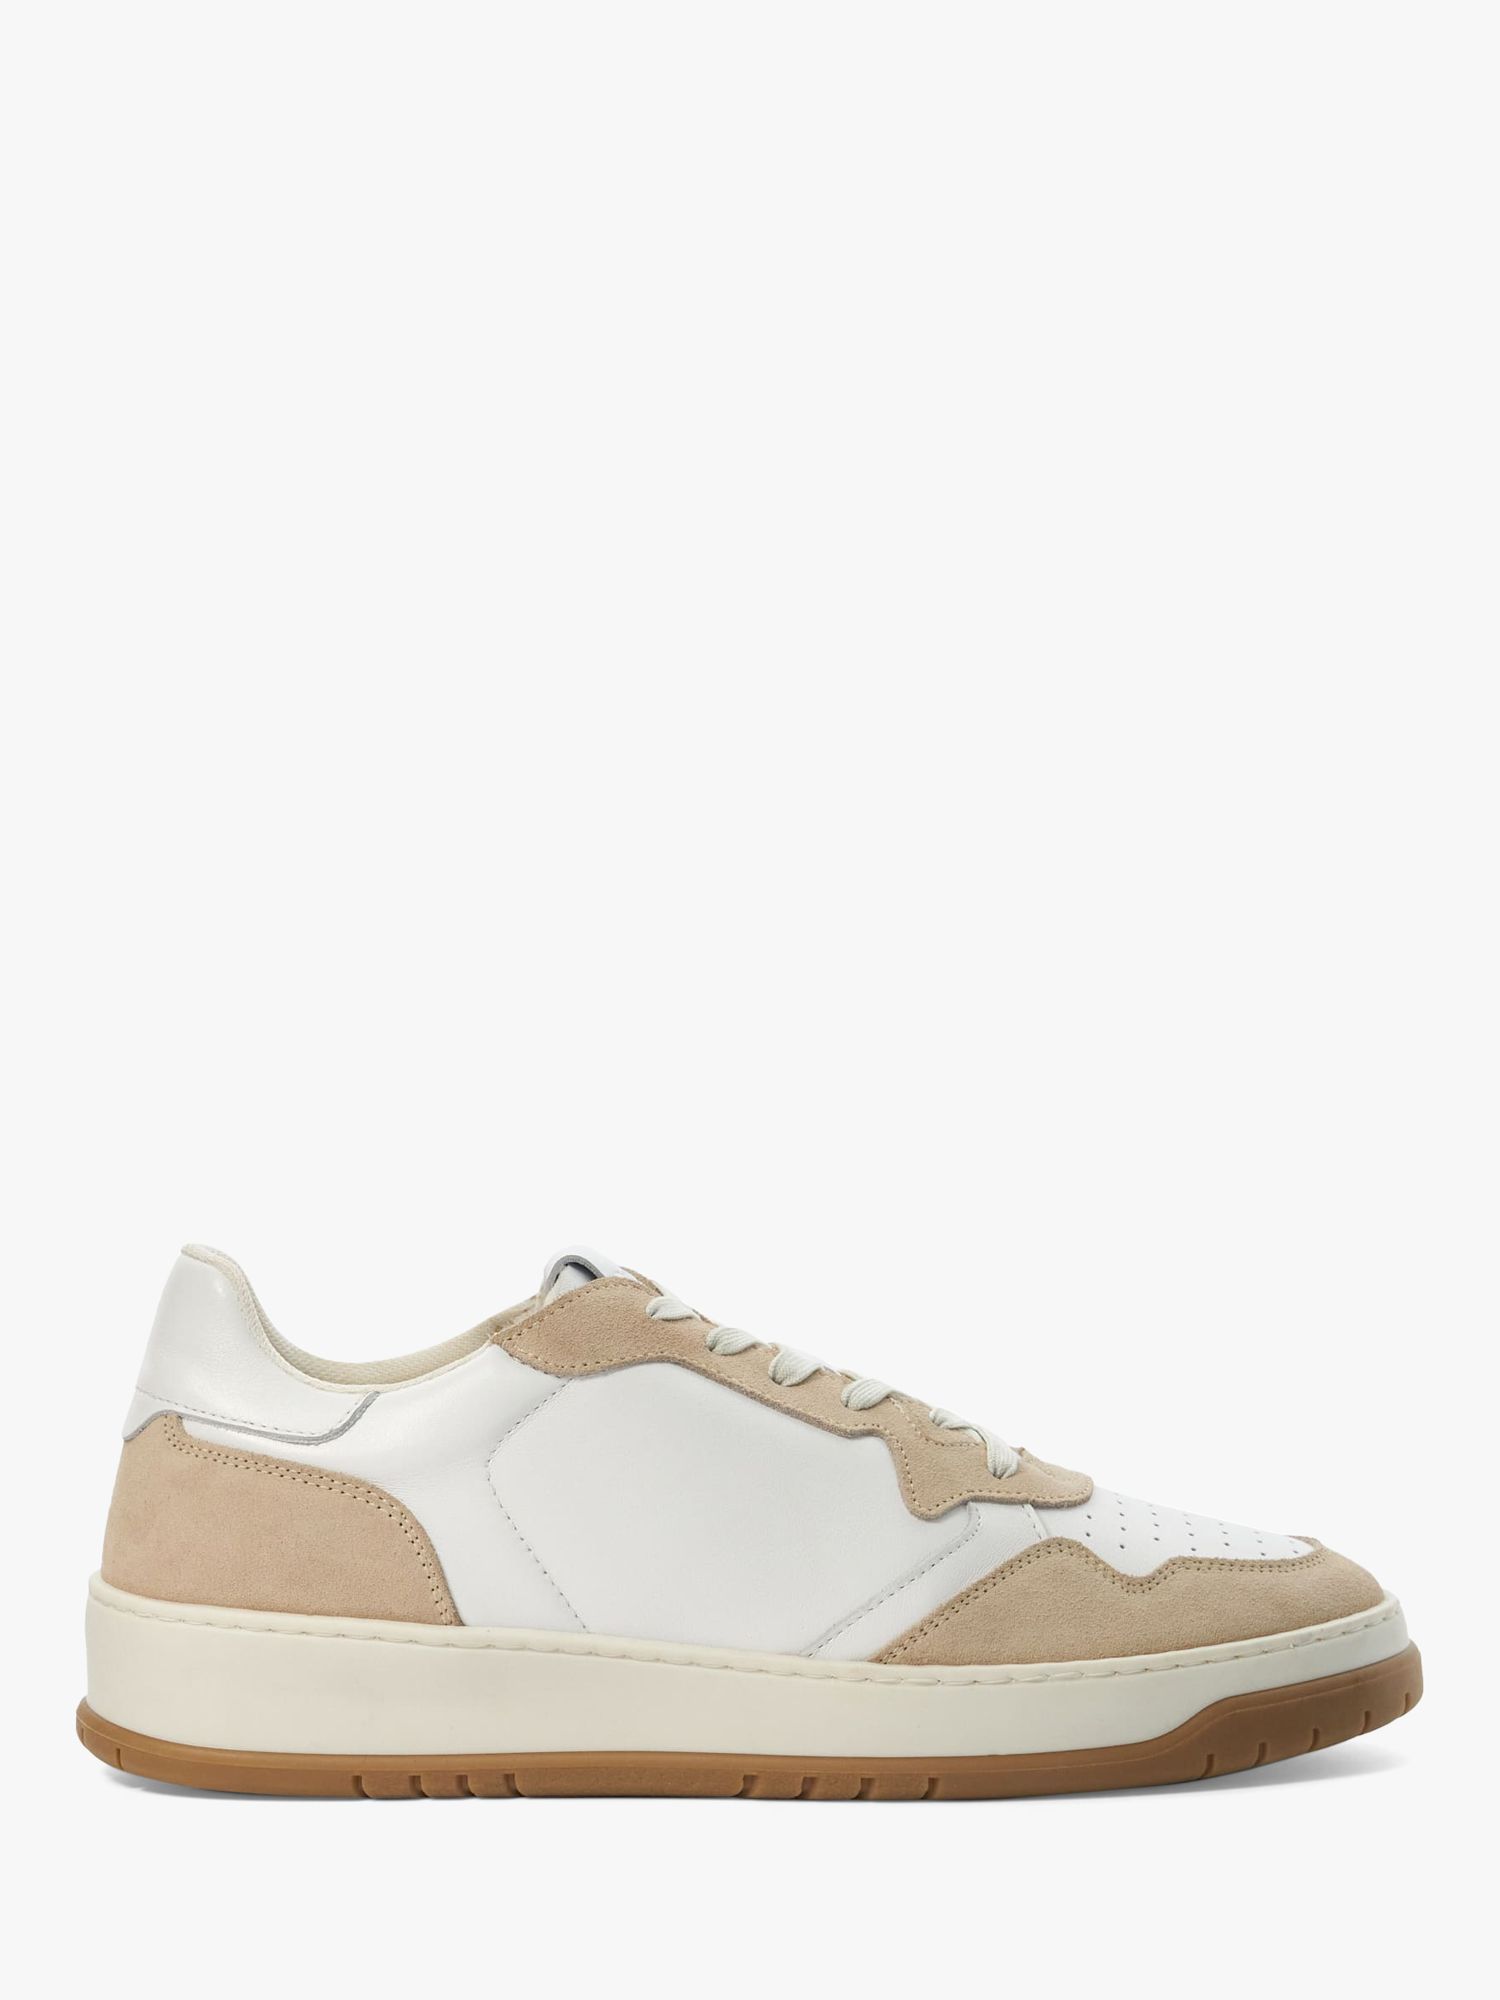 Dune Trent Leather Low Top Trainers, Beige/White, 6